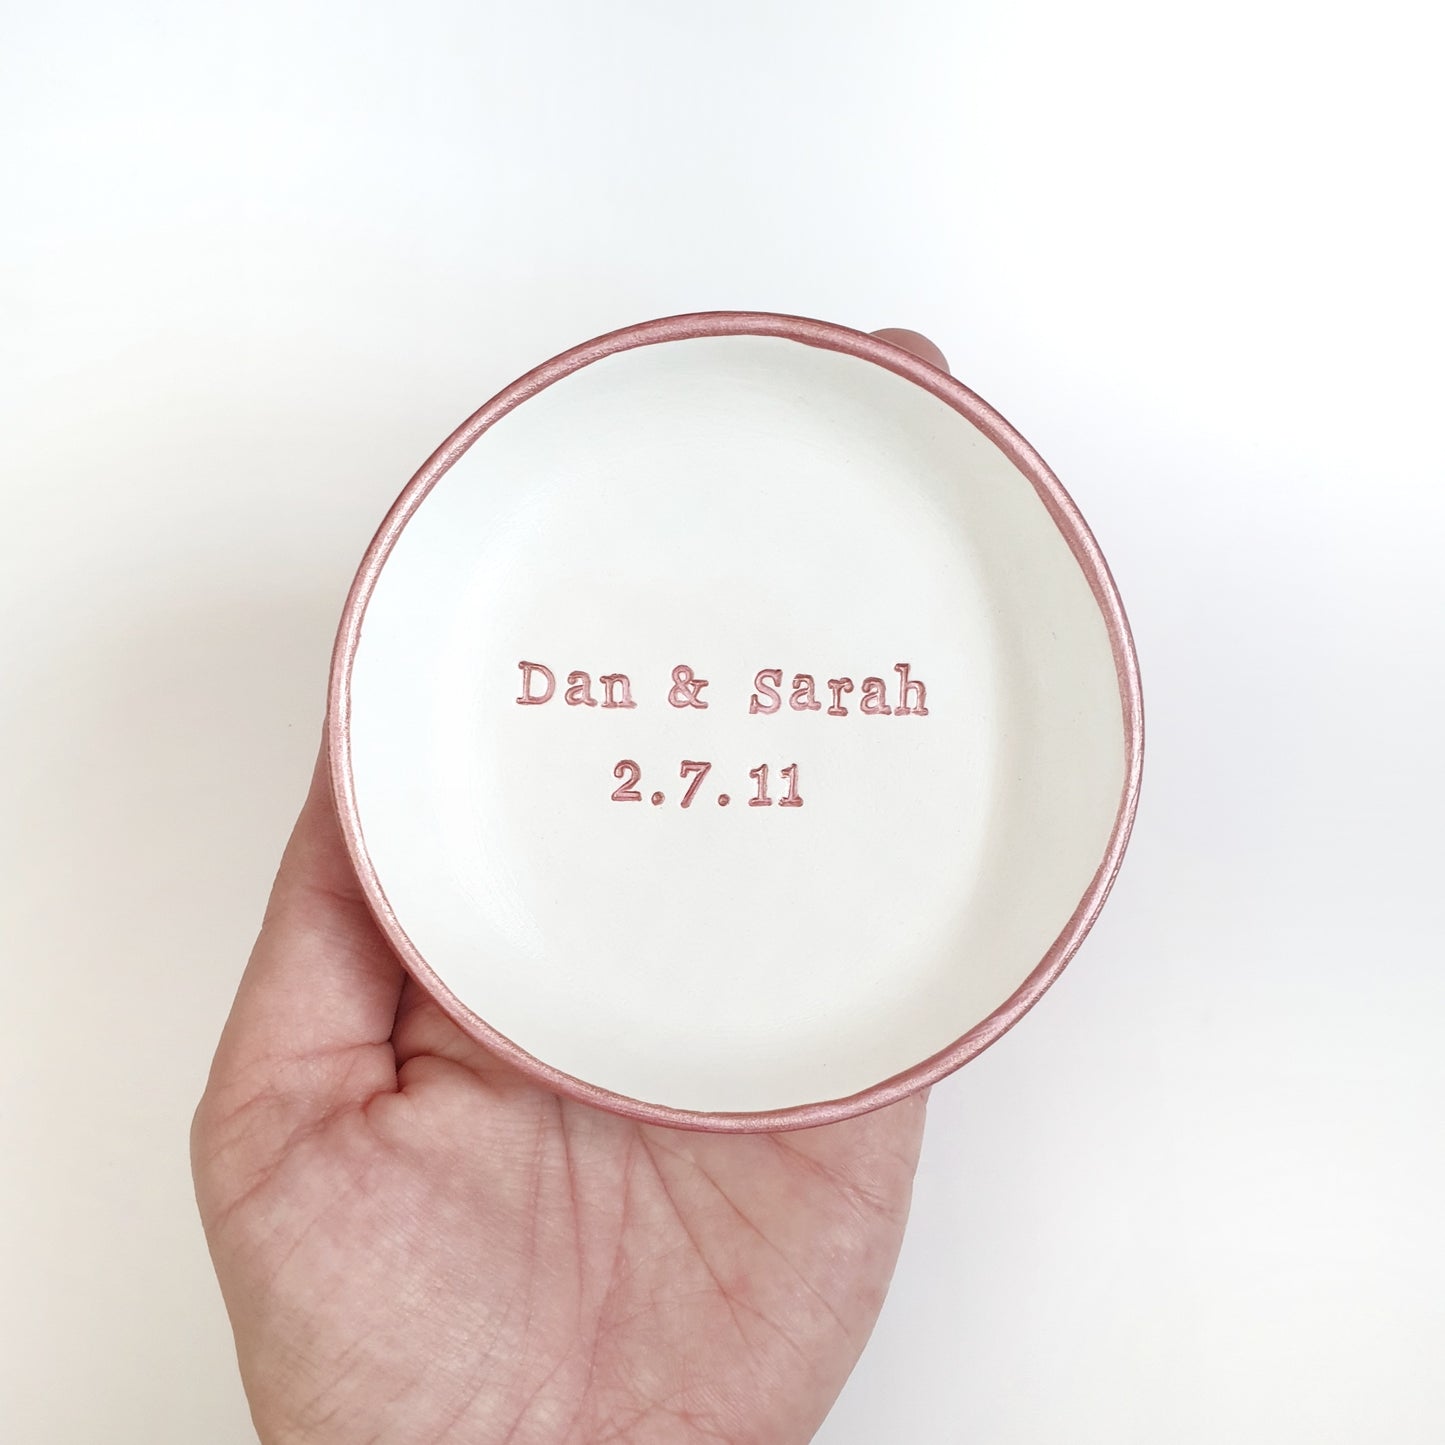 Personalised name dish with date